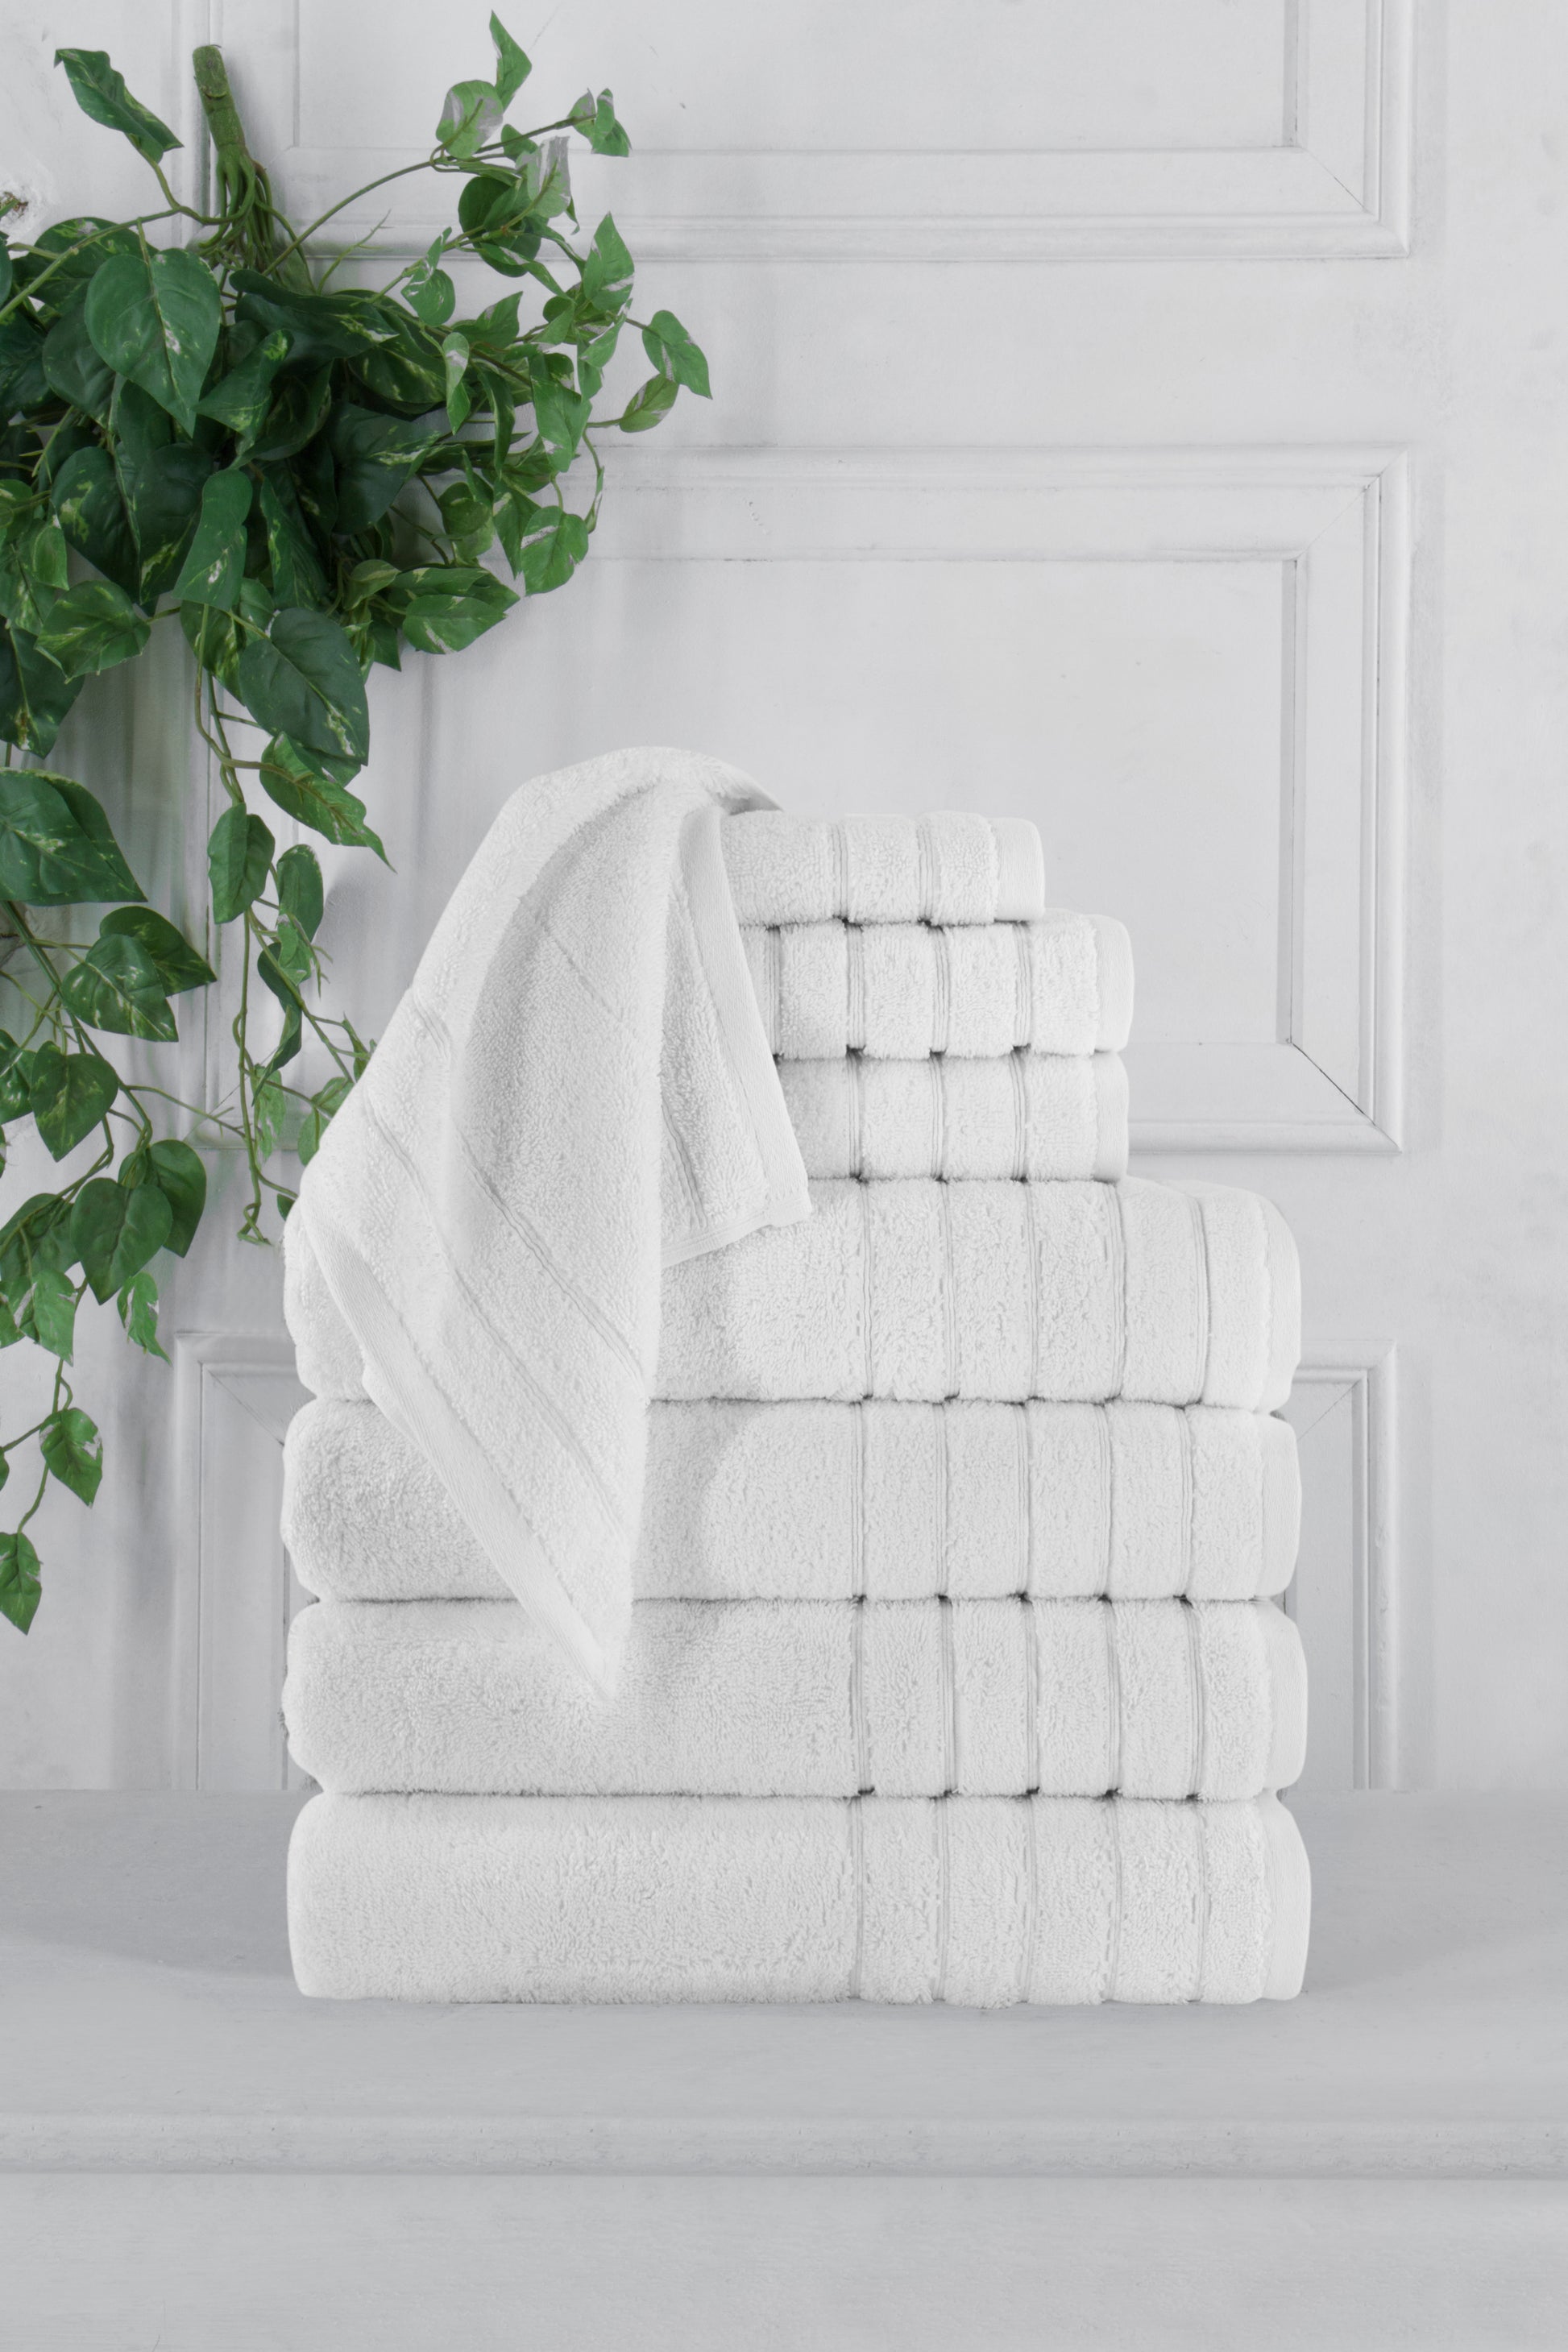 Bath Sheets & Egyptian Cotton Towels for Hotel - China Bath Towels